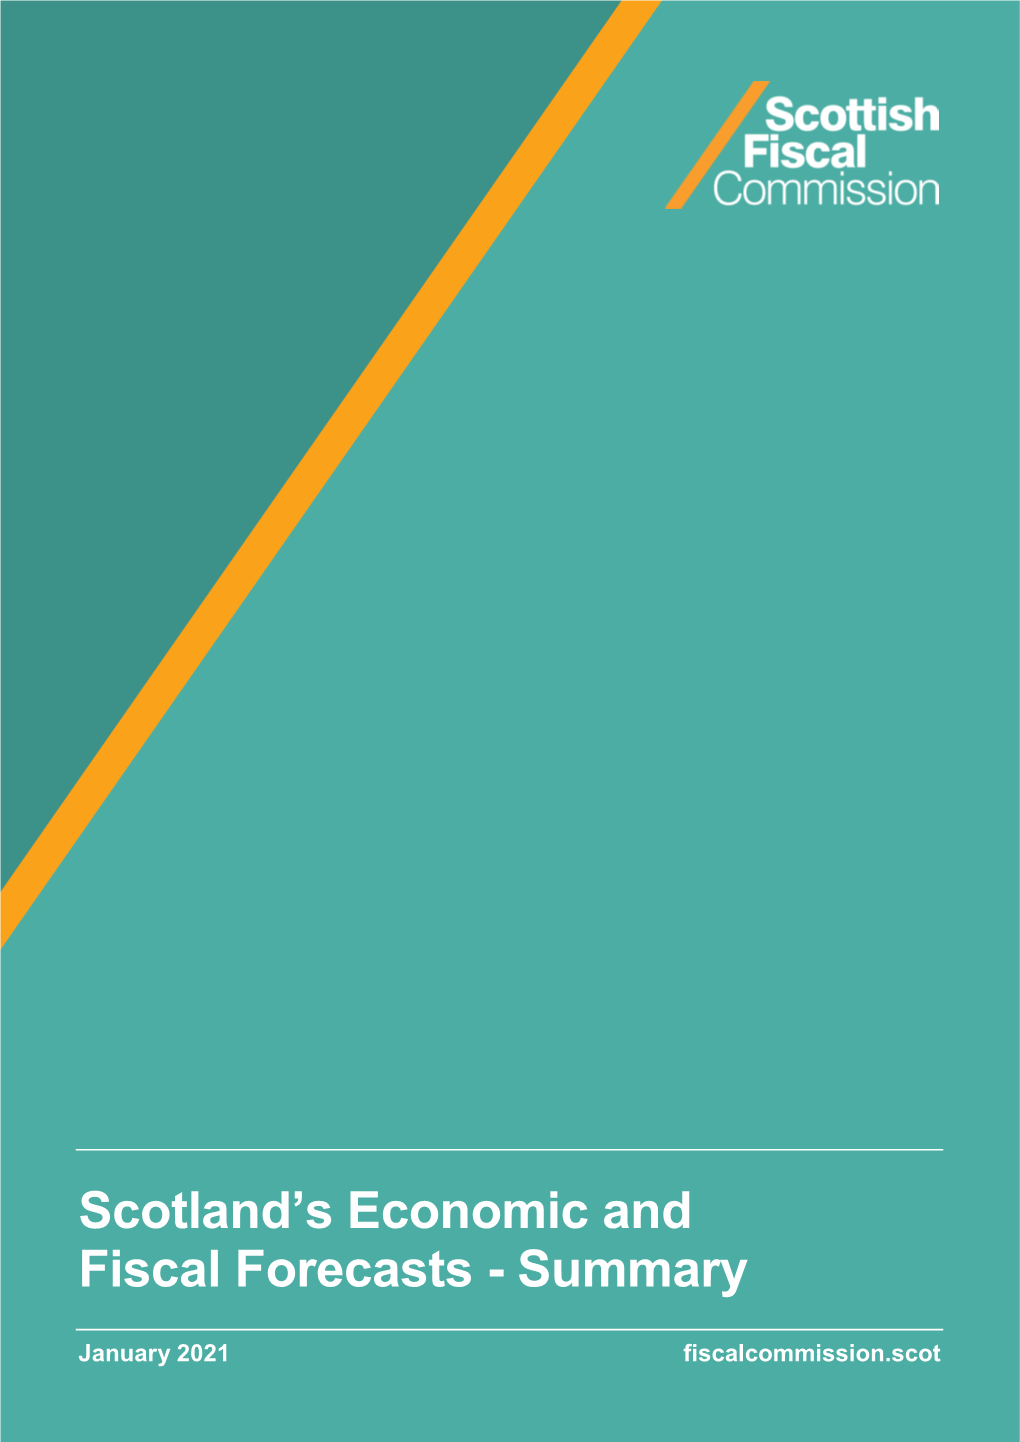 Scotland's Economic and Fiscal Forecasts